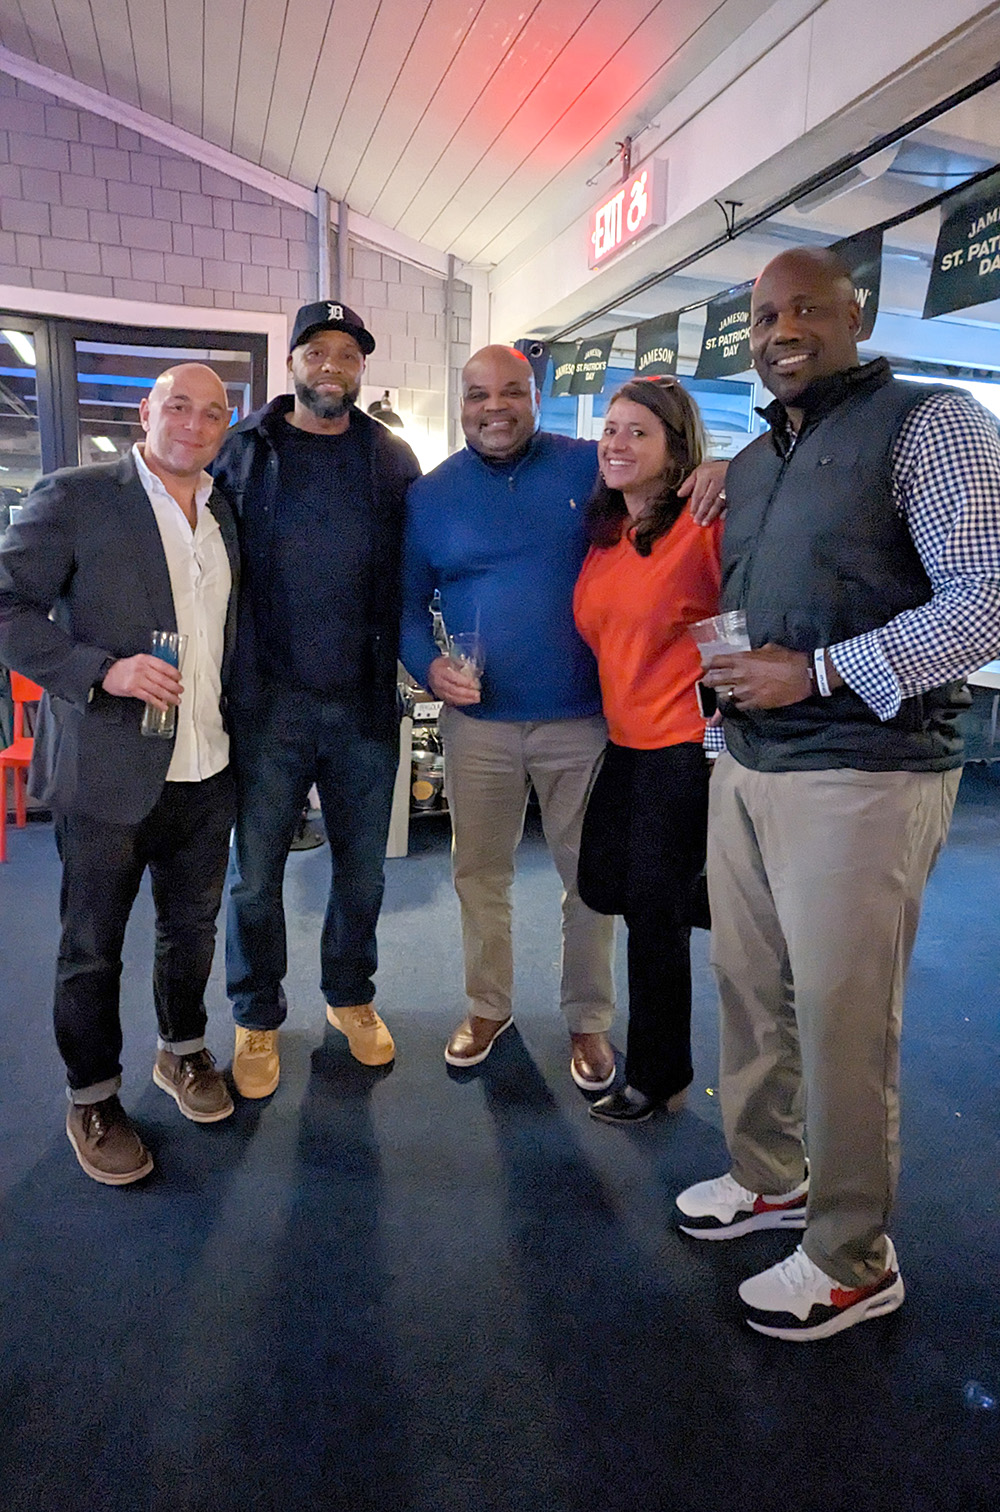 From left: founder and creative director DJ Haddad, DePriest, Smith, Carrasquilla, and Kevin Jones.